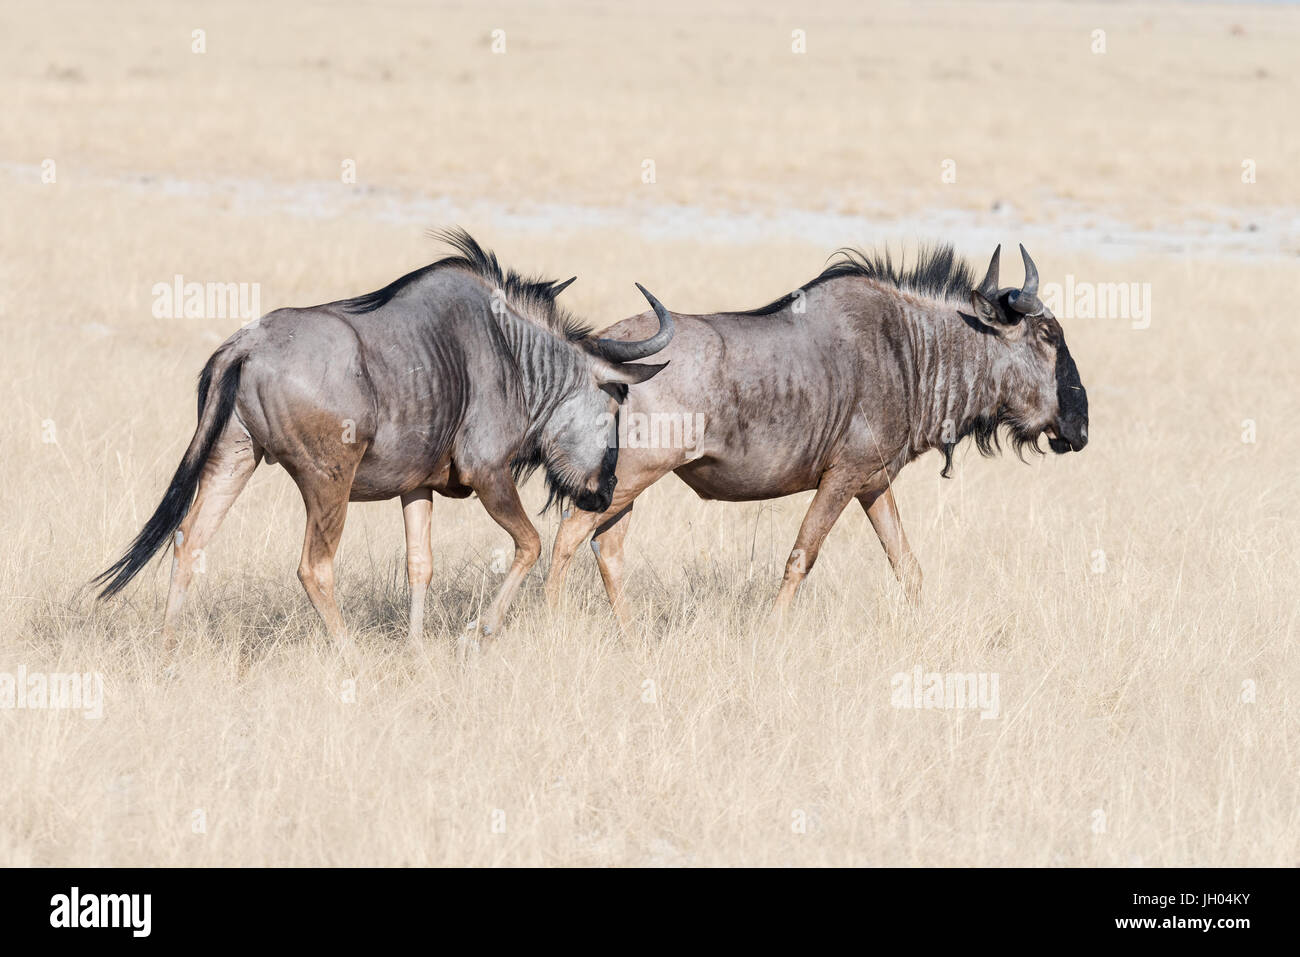 Two blue wildebeest, Connochaetes taurinus, also called a white-bearded wildebeest or brindled gnu, walking in grass Stock Photo